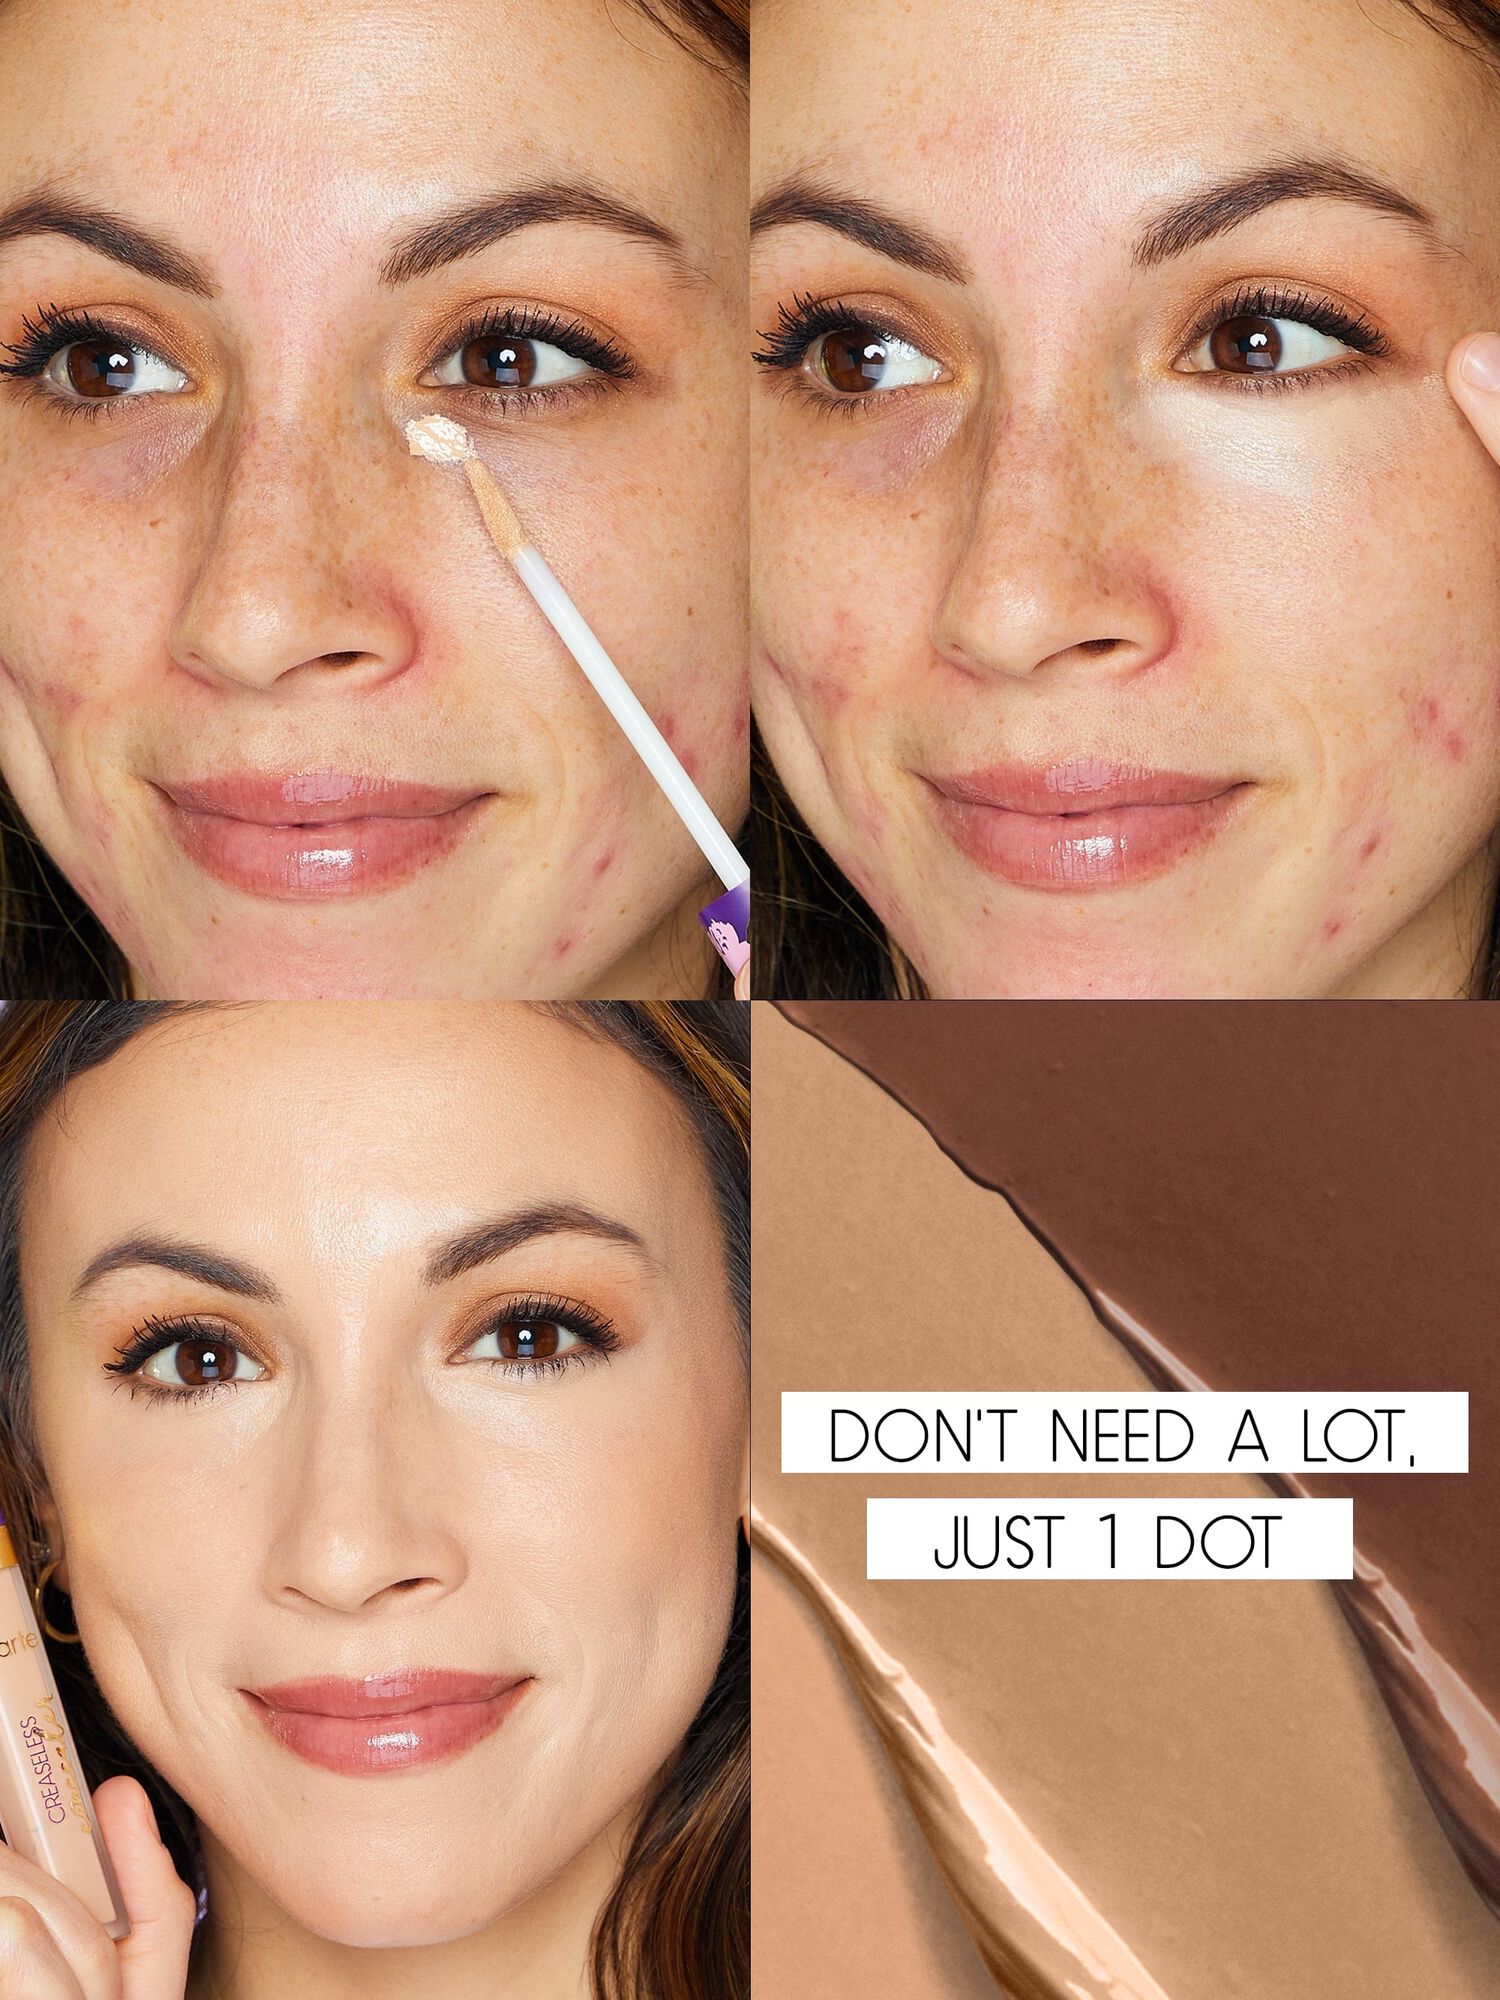 travel-size creaseless concealer™ image number null